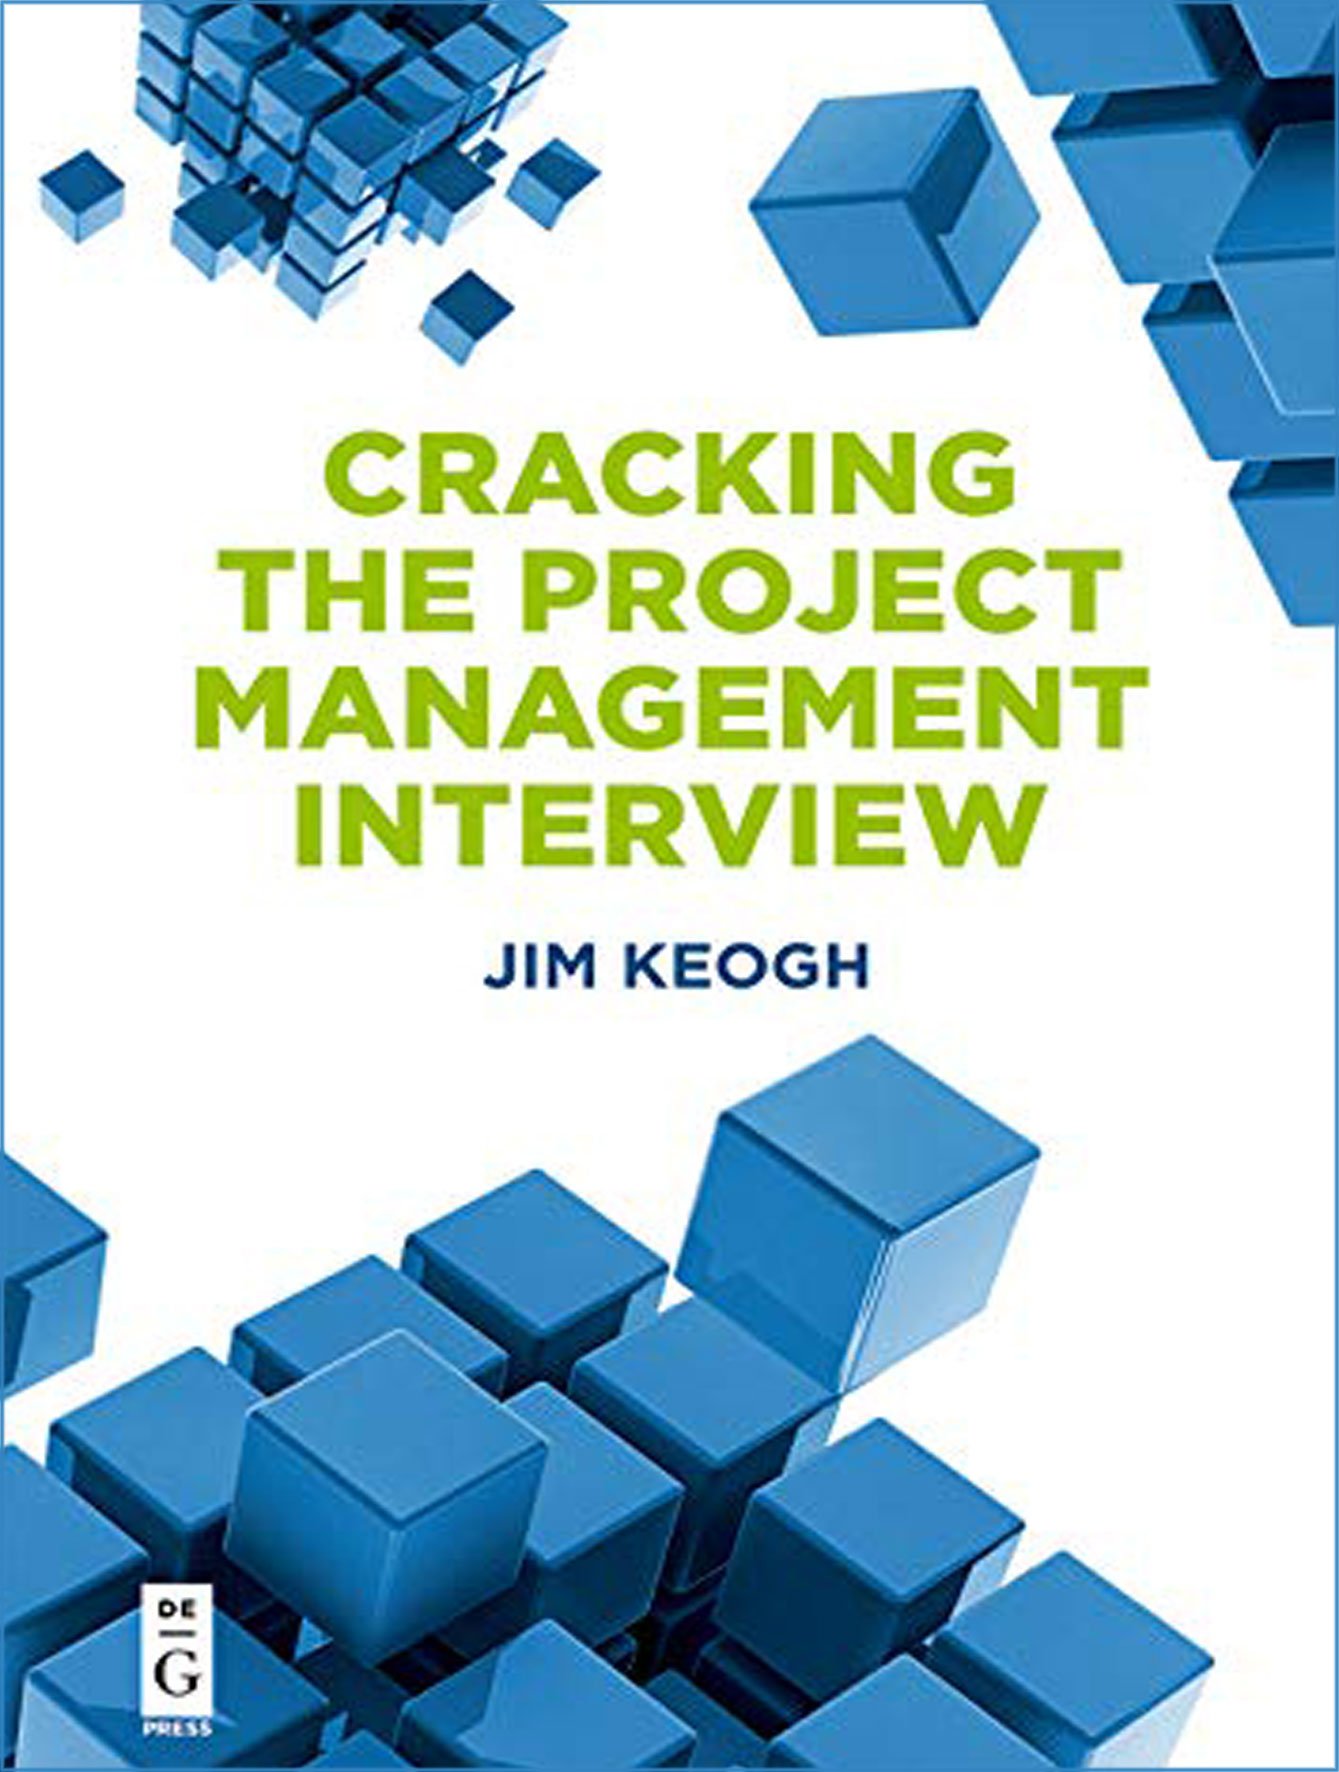 cracking the pm interview pdf download free